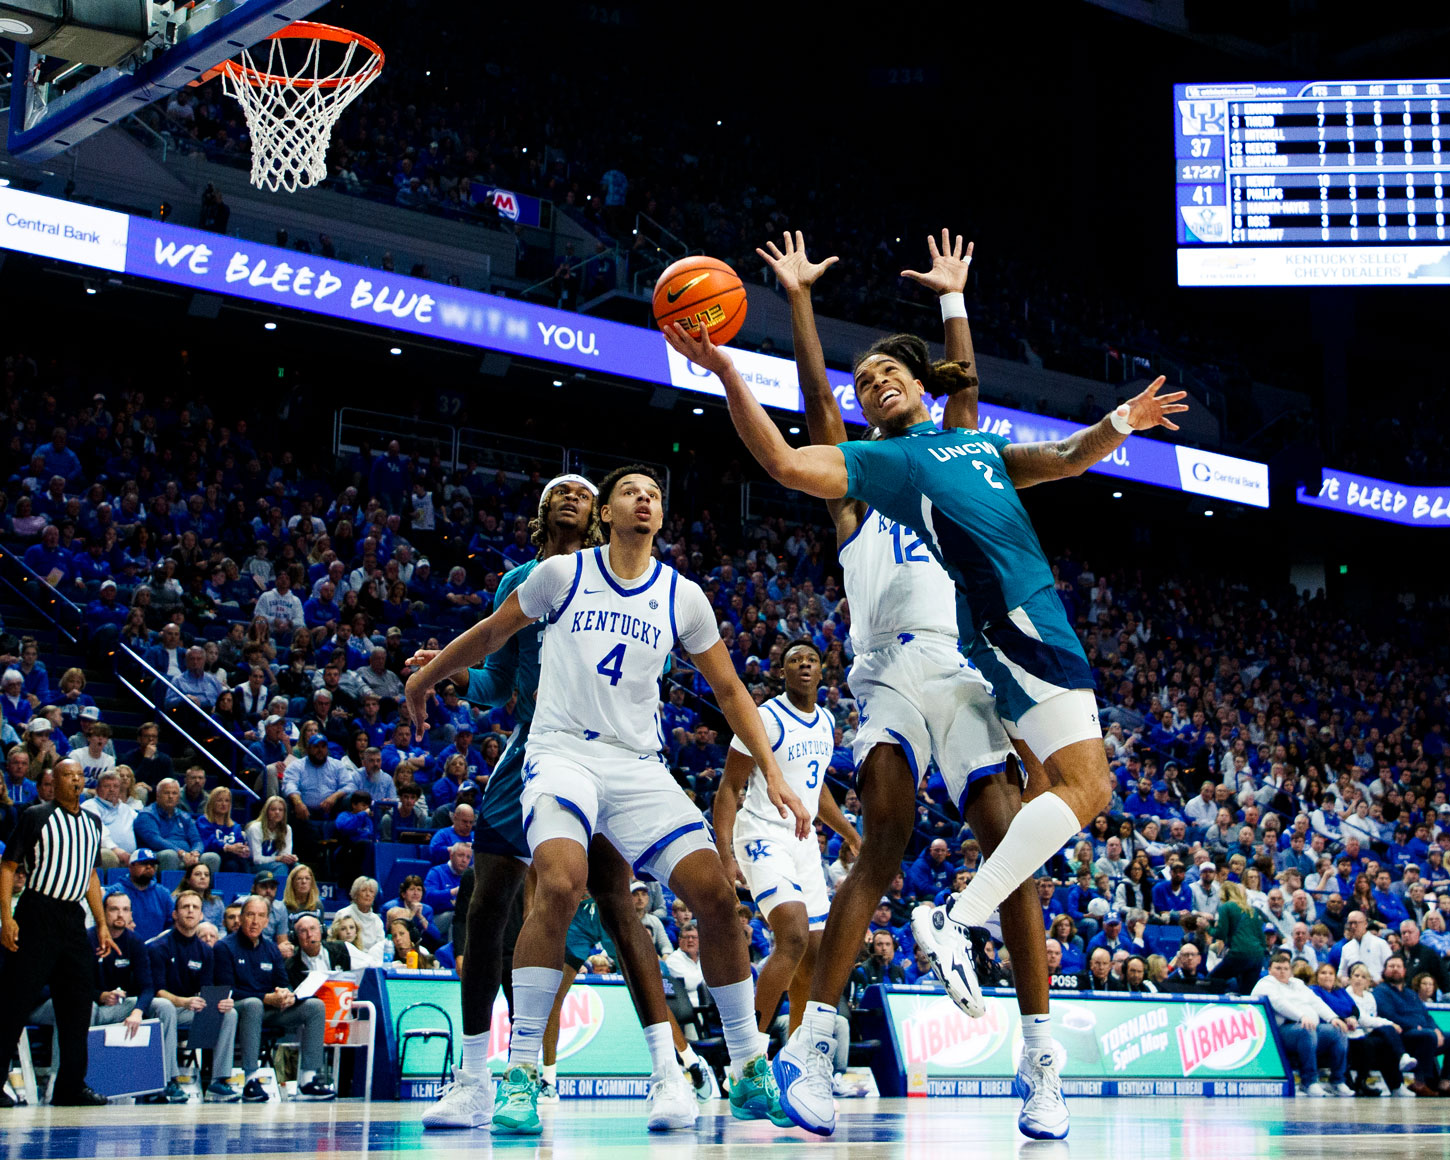 UNCW player Phillips makes an amazing shot during the game against Kentucky on Dec. 2